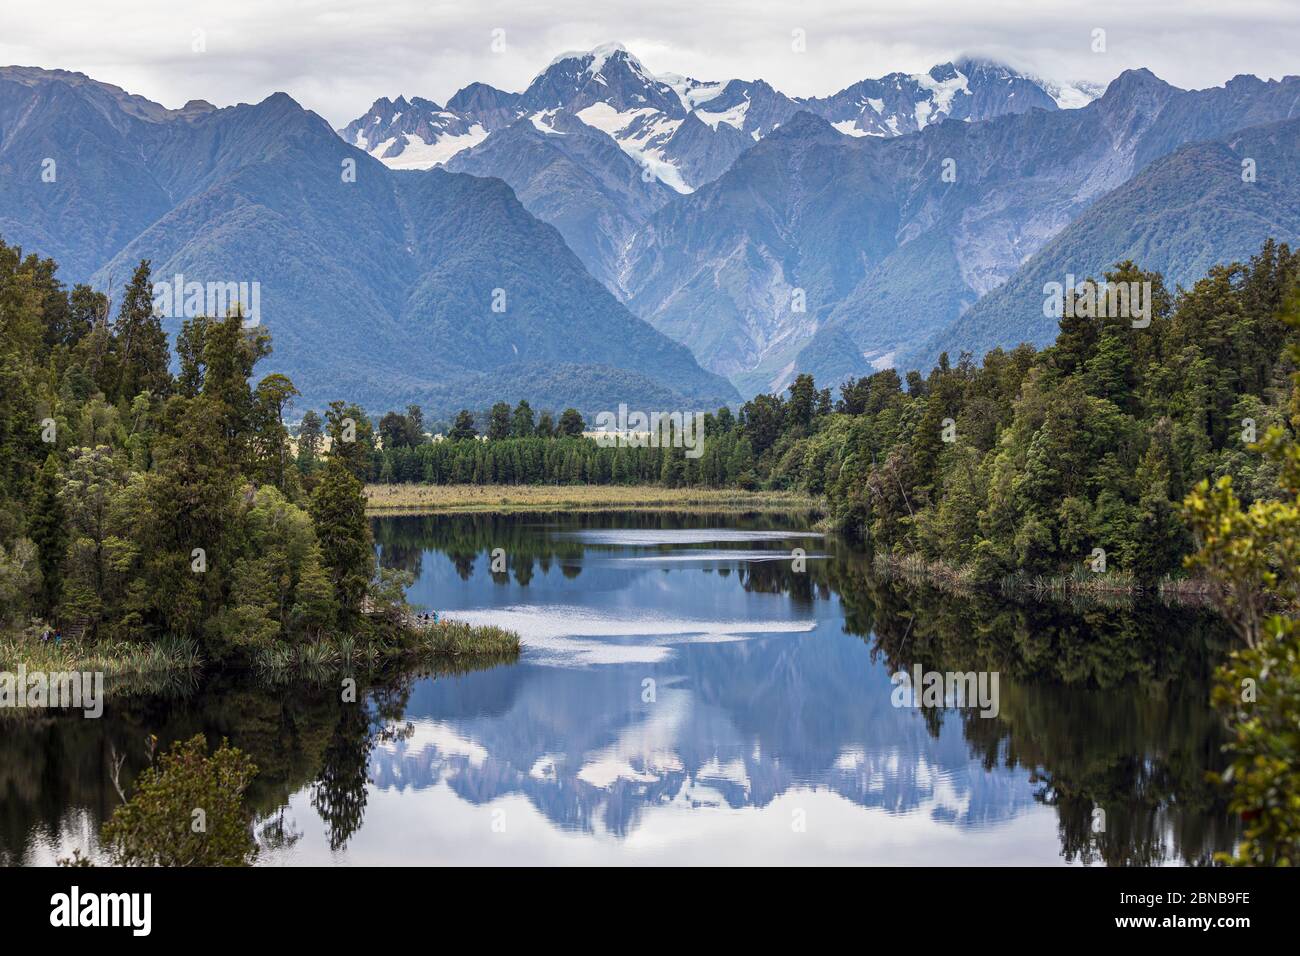 The 'View of Views' - Lake Matheson looking towards Mount Tasman and Mount Cook, Fox Glacier, South Island, New Zealand Stock Photo